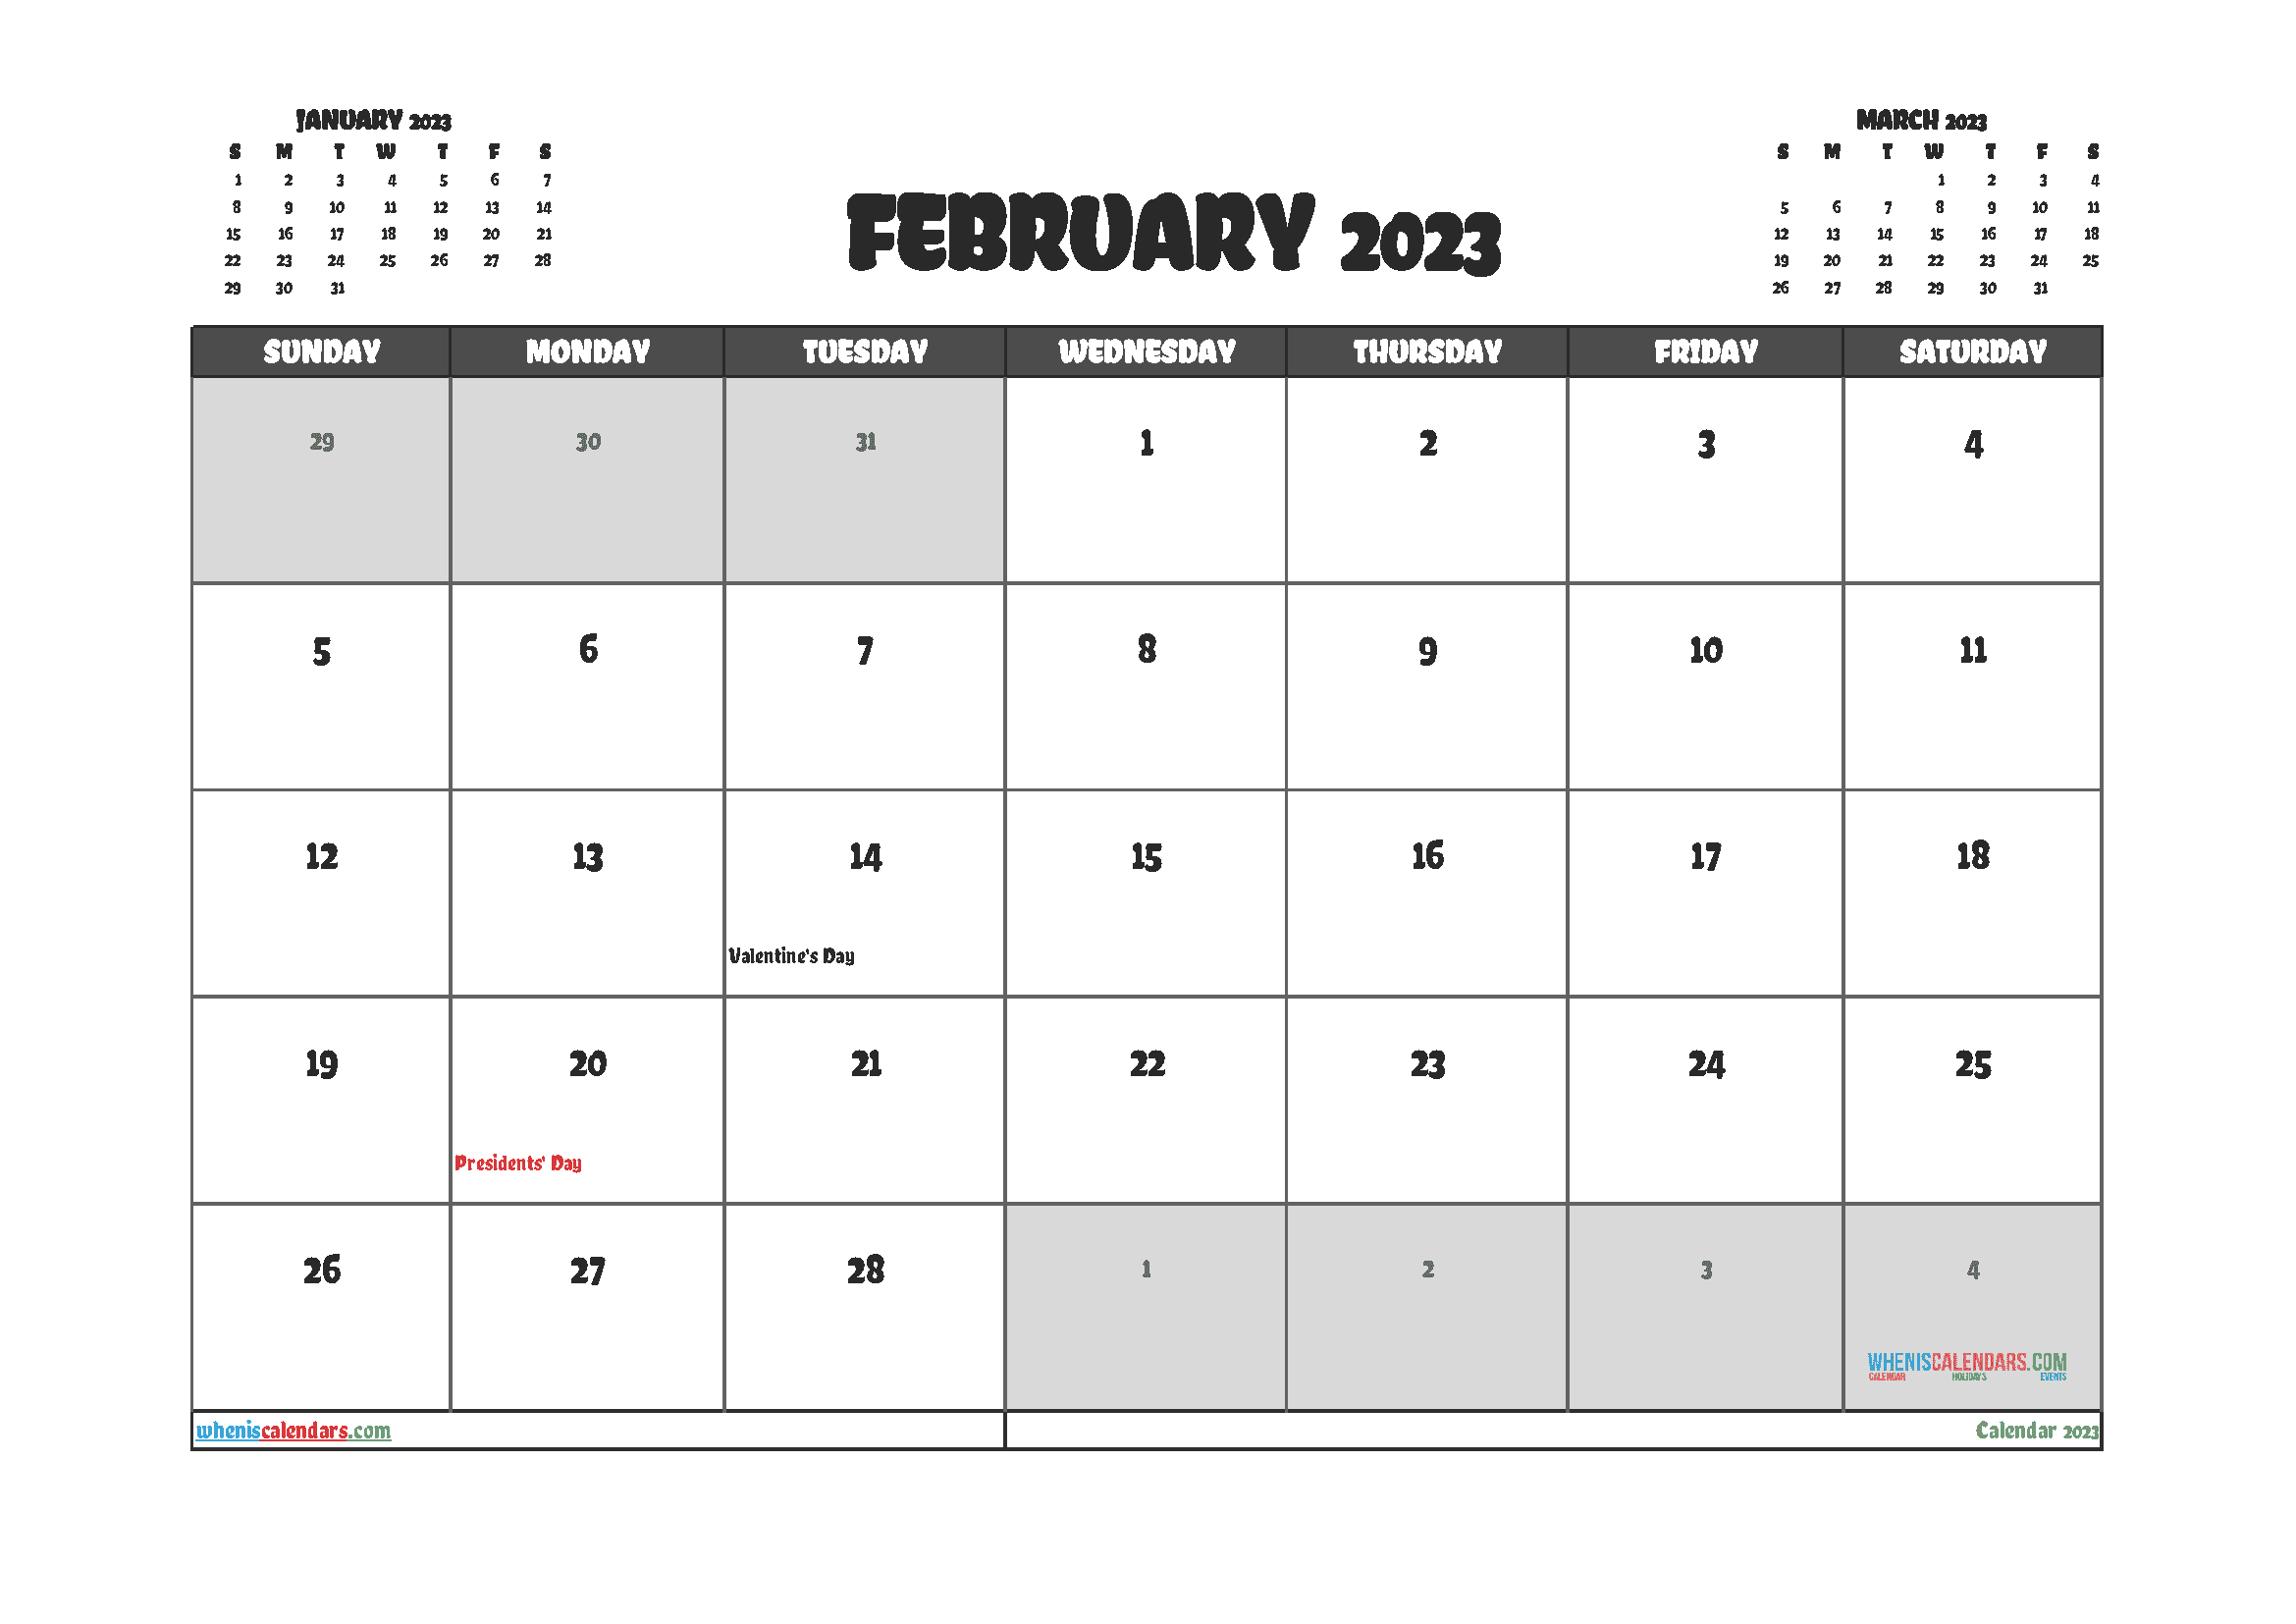 Free Calendar 2023 February with Holidays PDF in Landscape